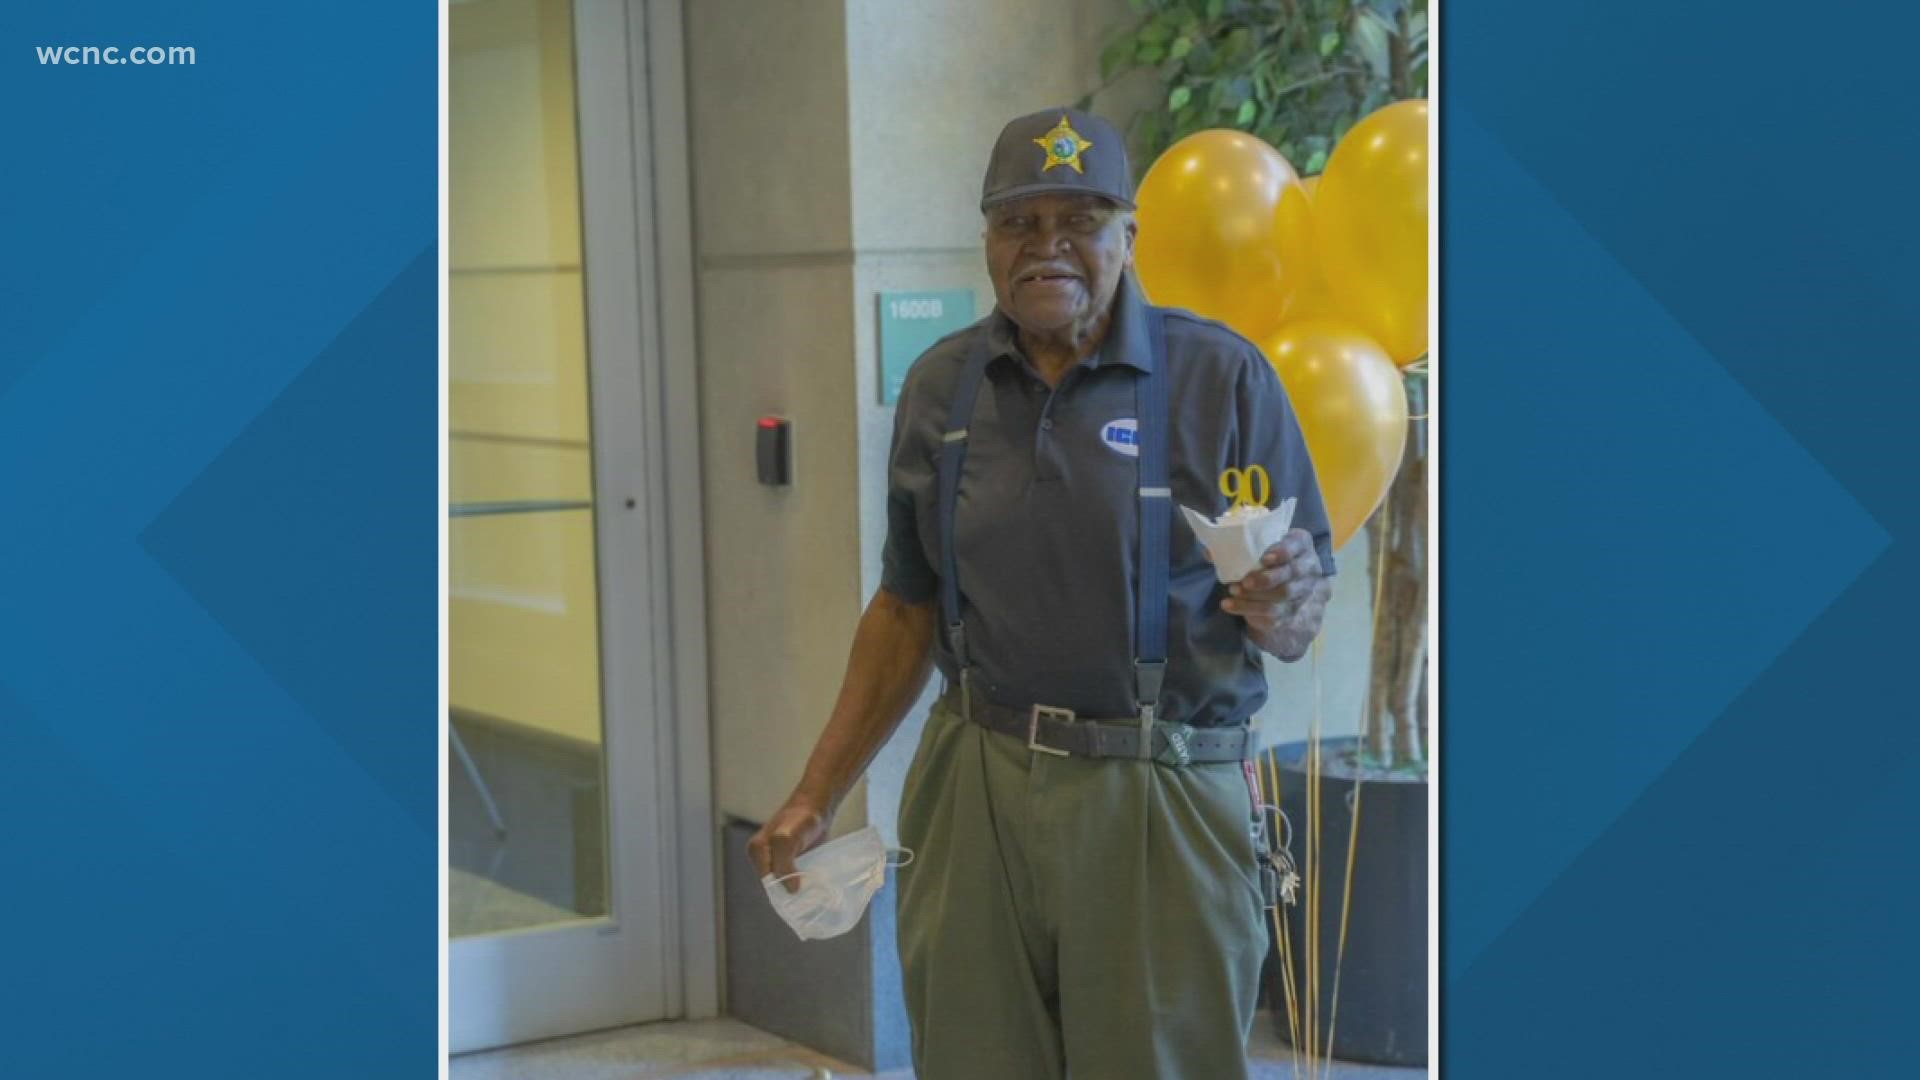 He has been working as a custodian at the detention center for the past five years and is a beloved employee.